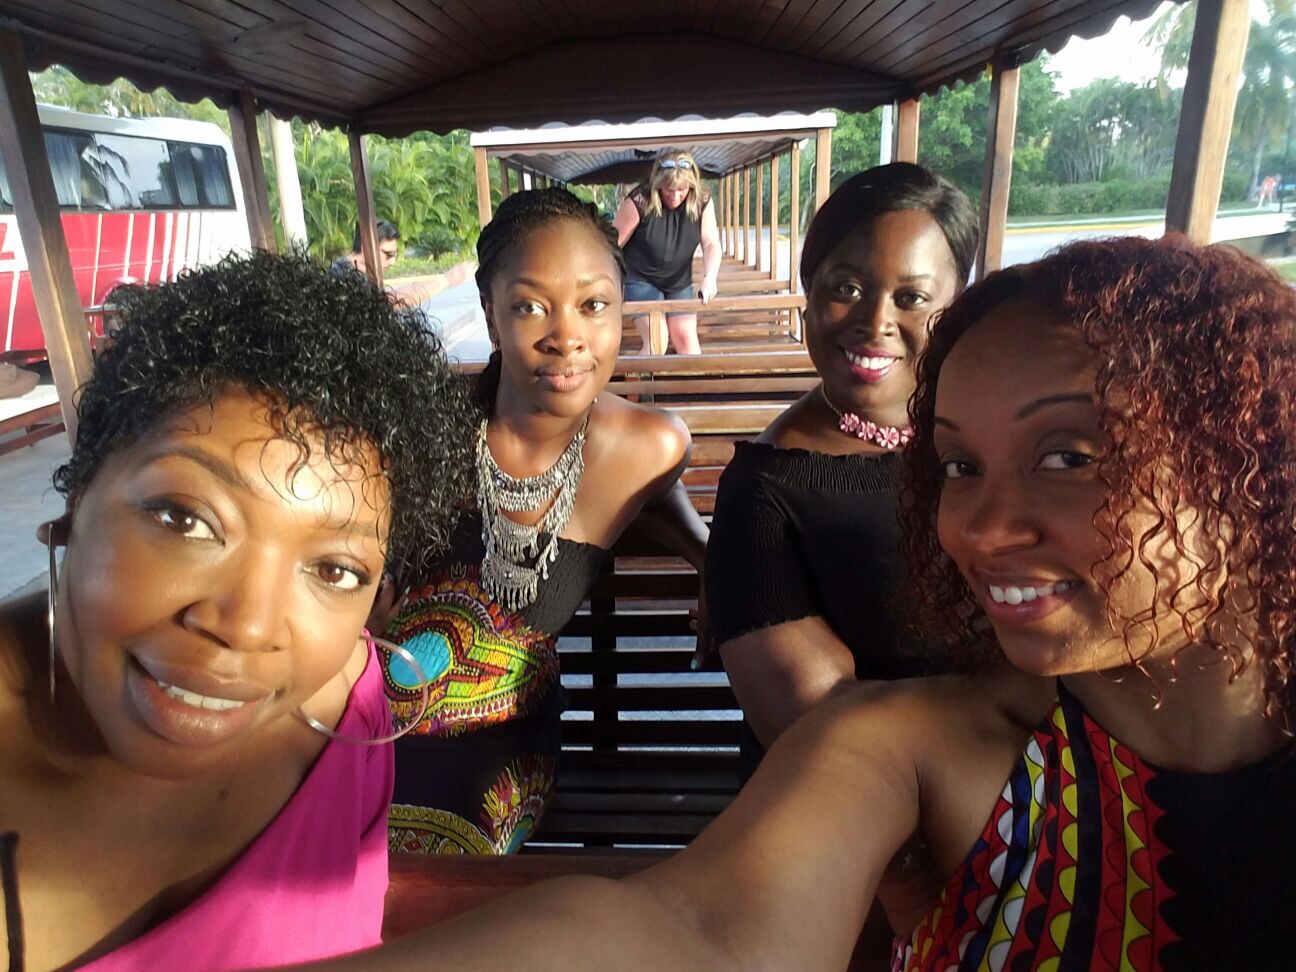 Me and my girlfriends on the trolley in Punta Cana DR